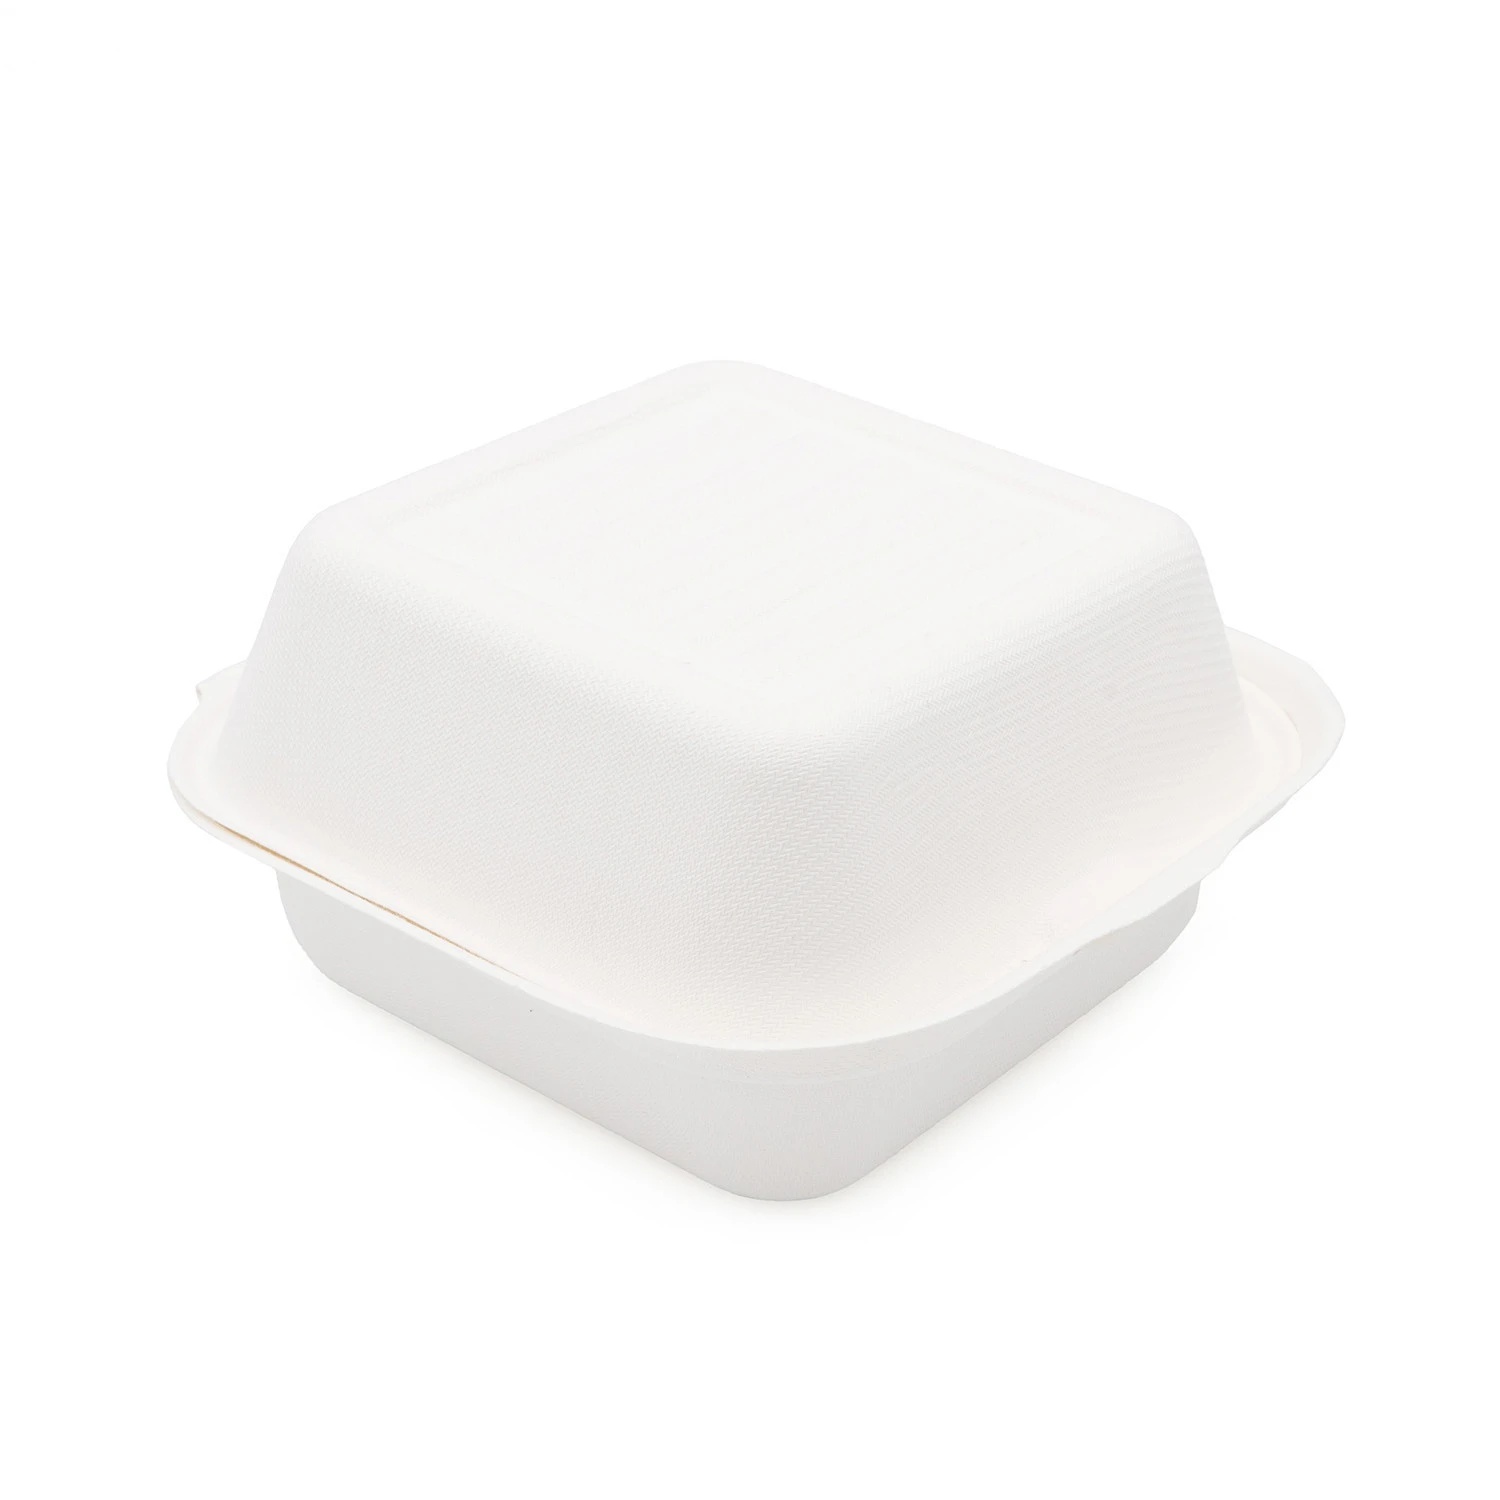 Sell well the paper box for lunch solid color disposable paper tableware 450ml Hamburger Box